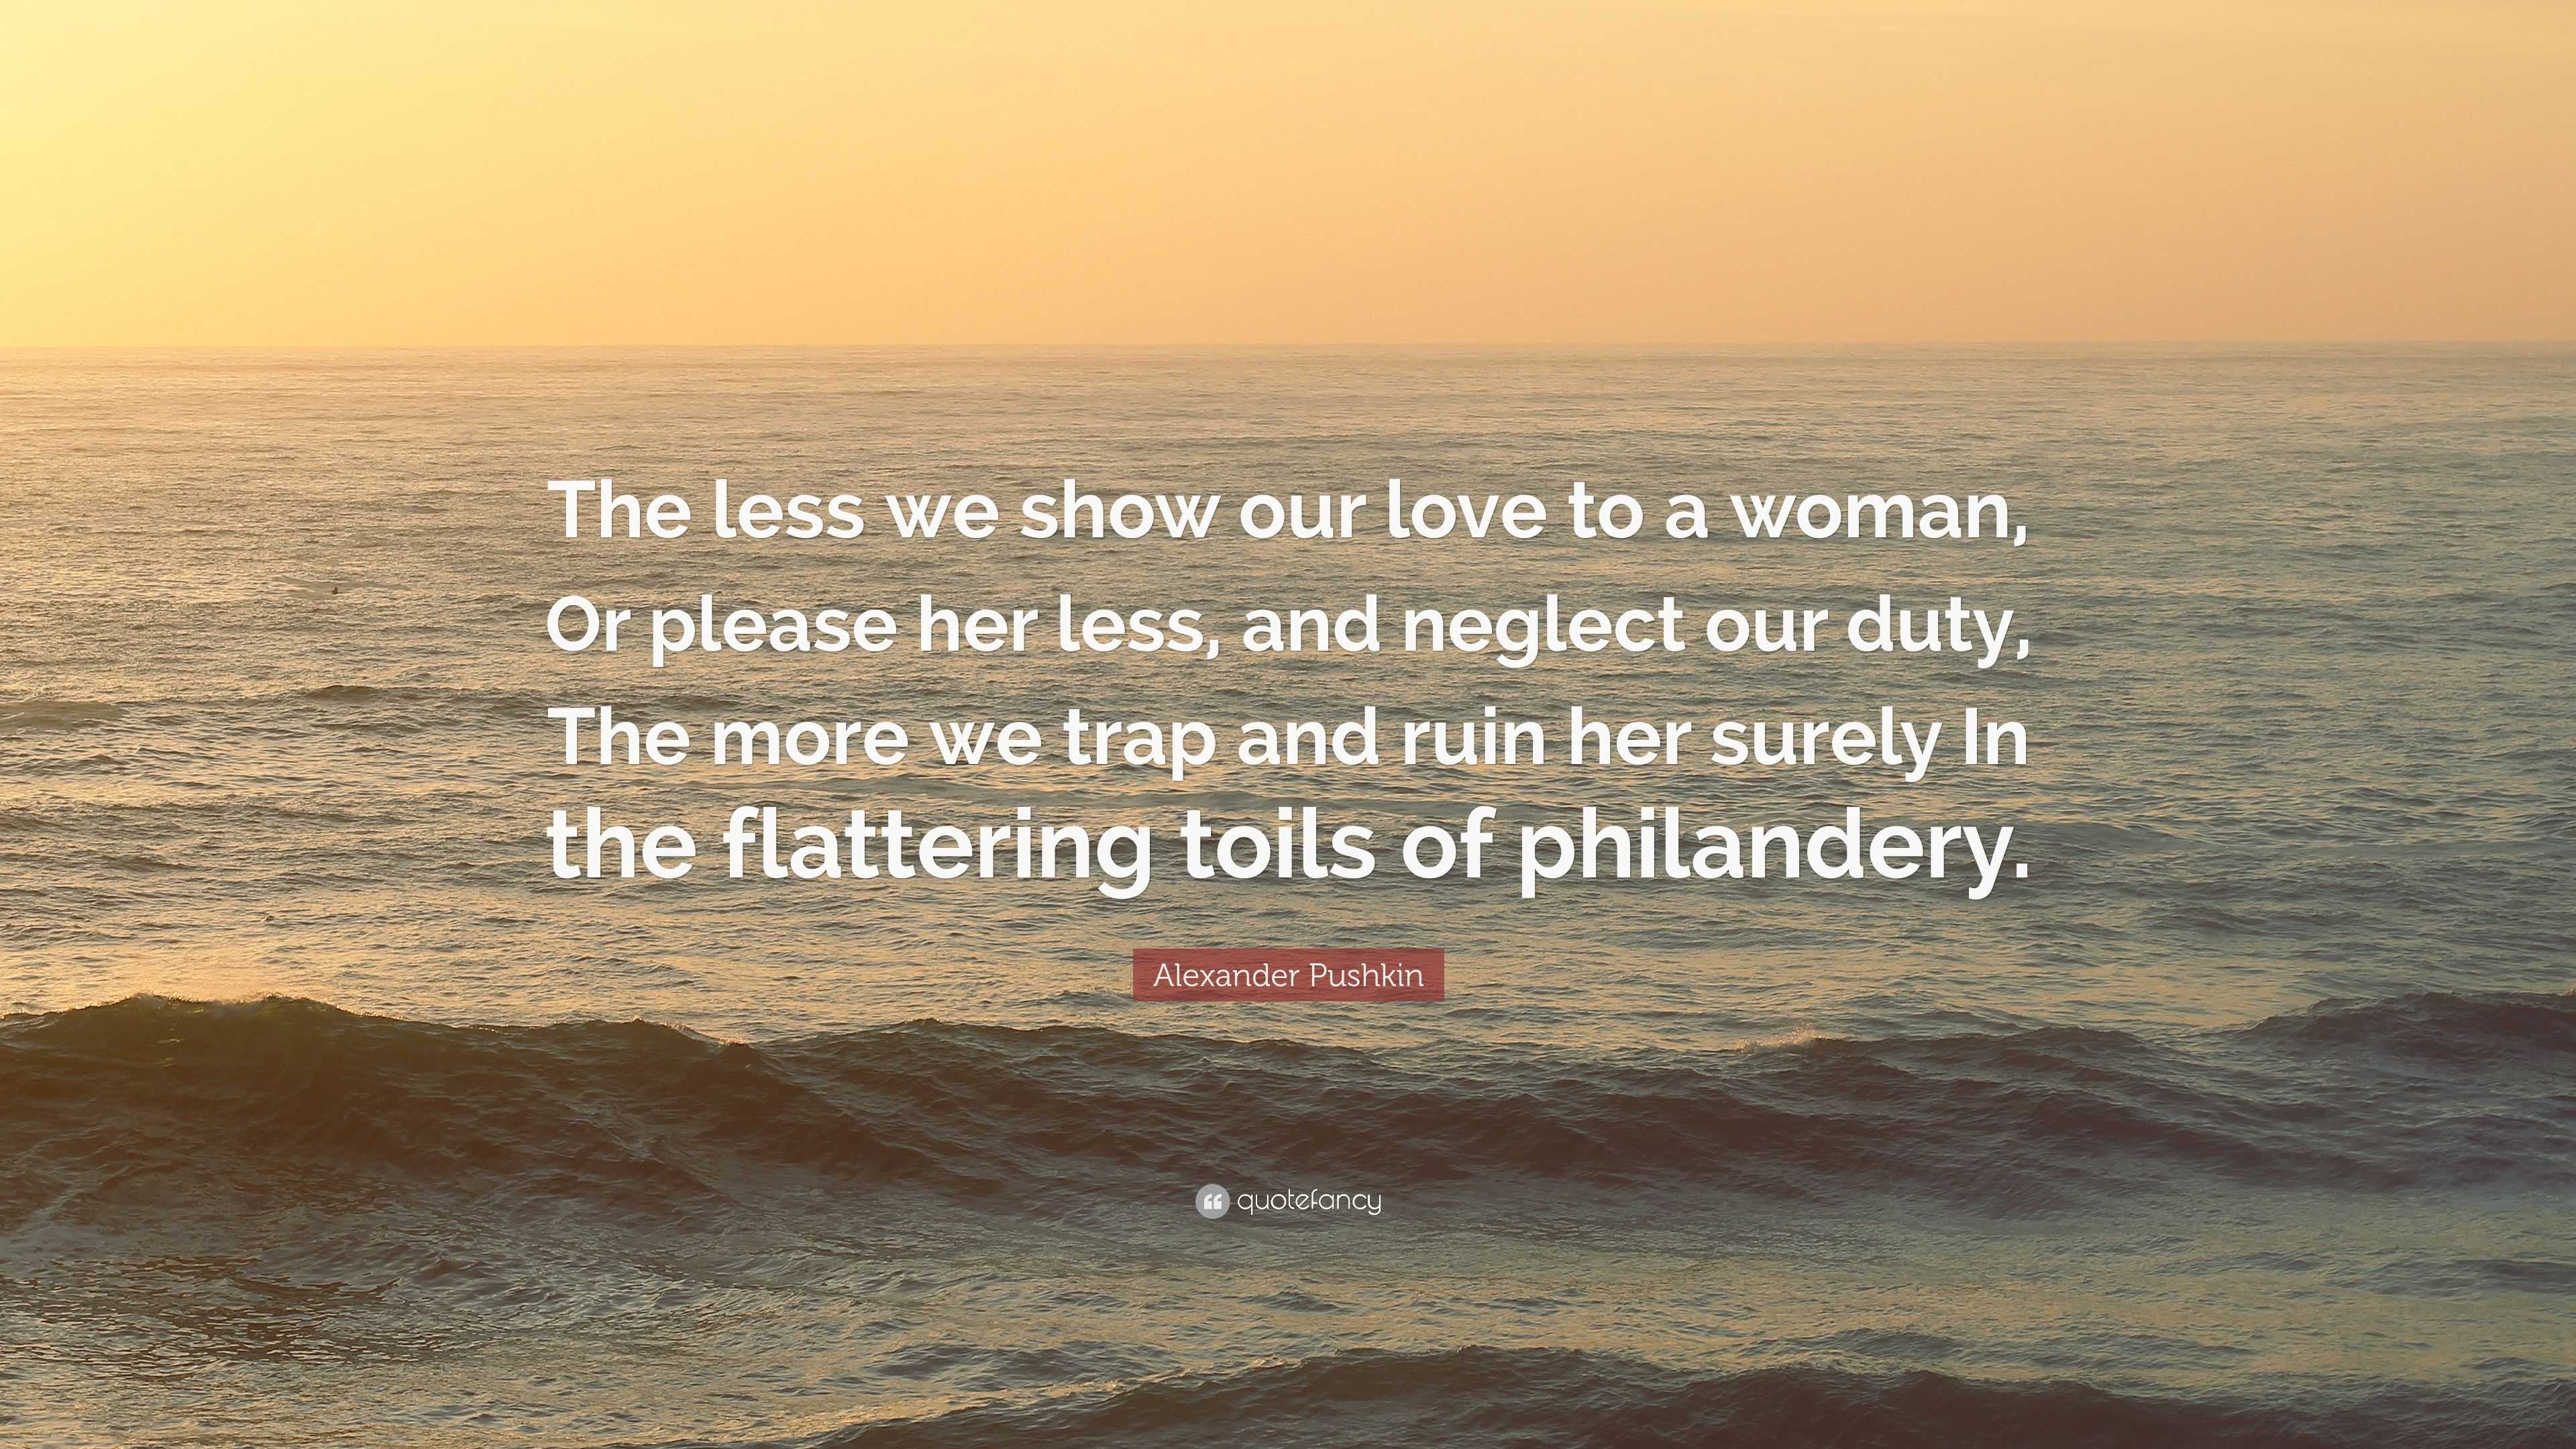 Alexander Pushkin Quote: “The less we show our love to a woman, Or ...